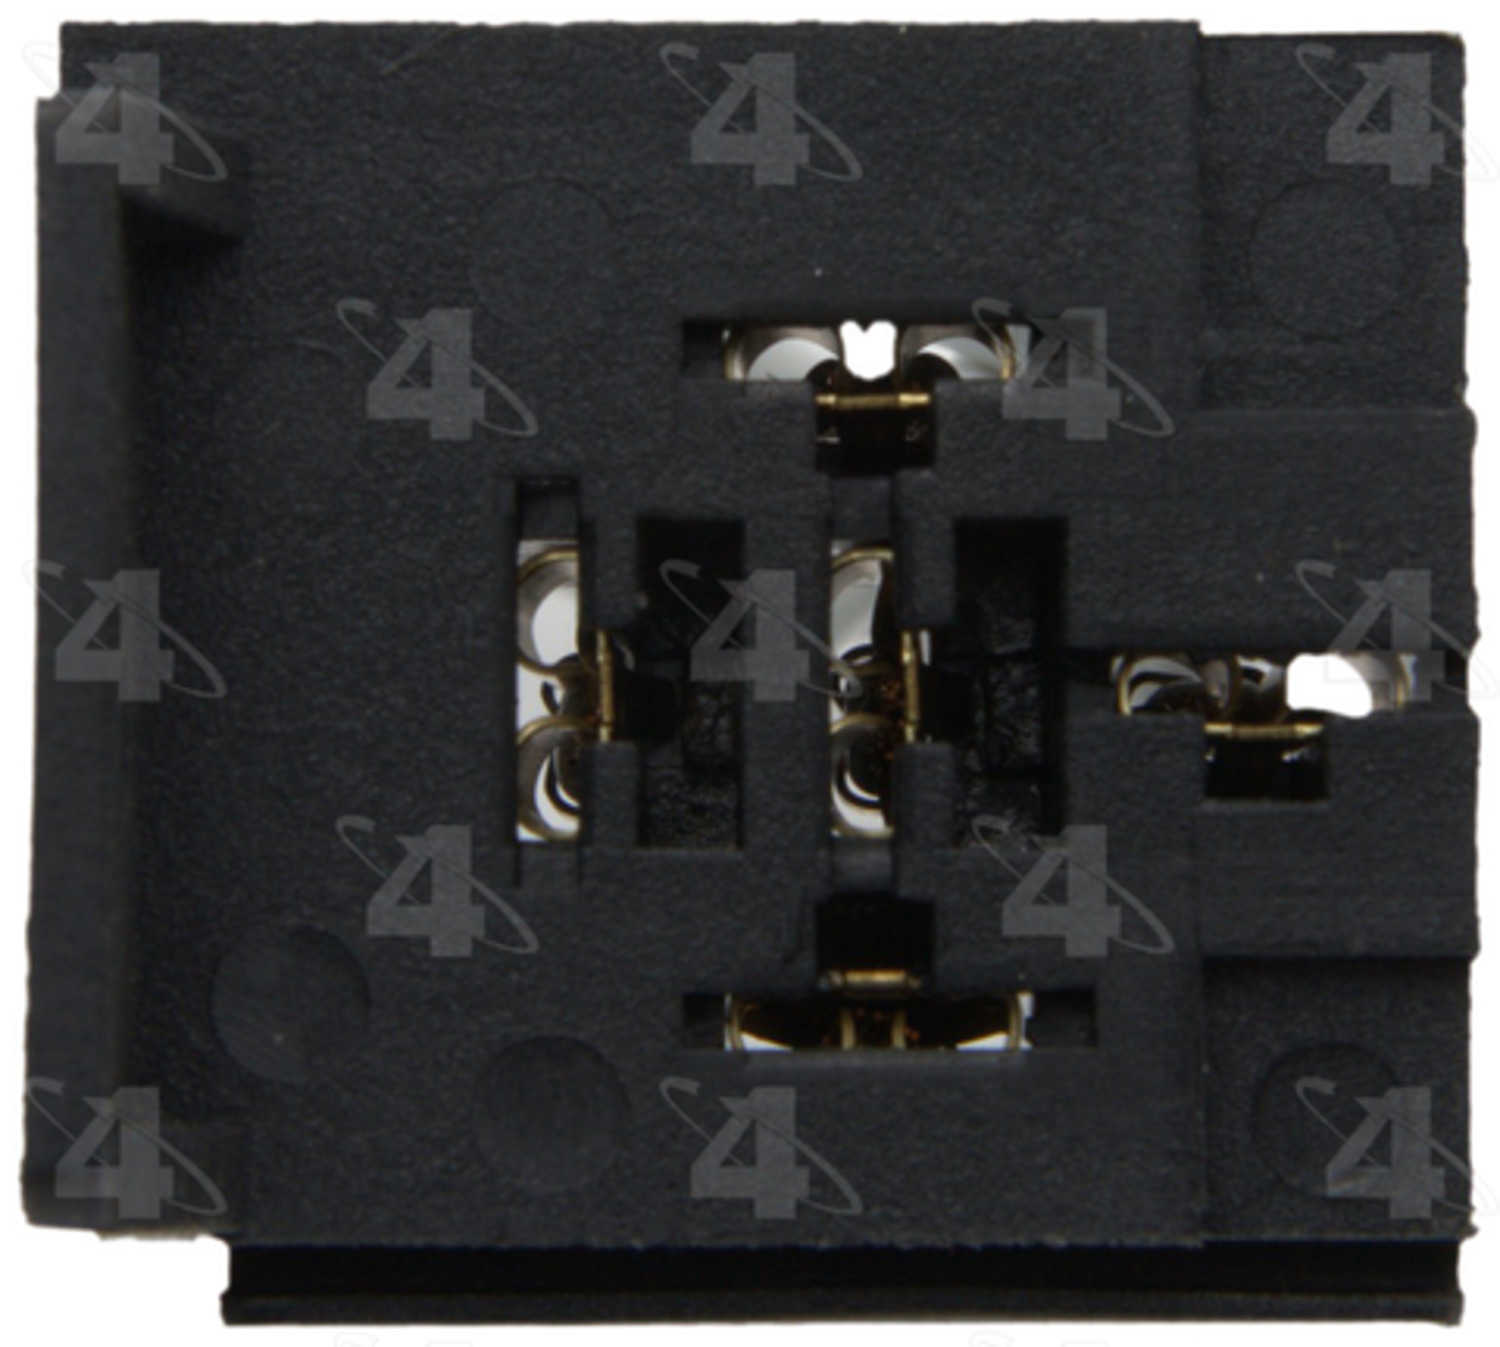 FOUR SEASONS - Engine Cooling Fan Motor Relay Connector - FSE 37211